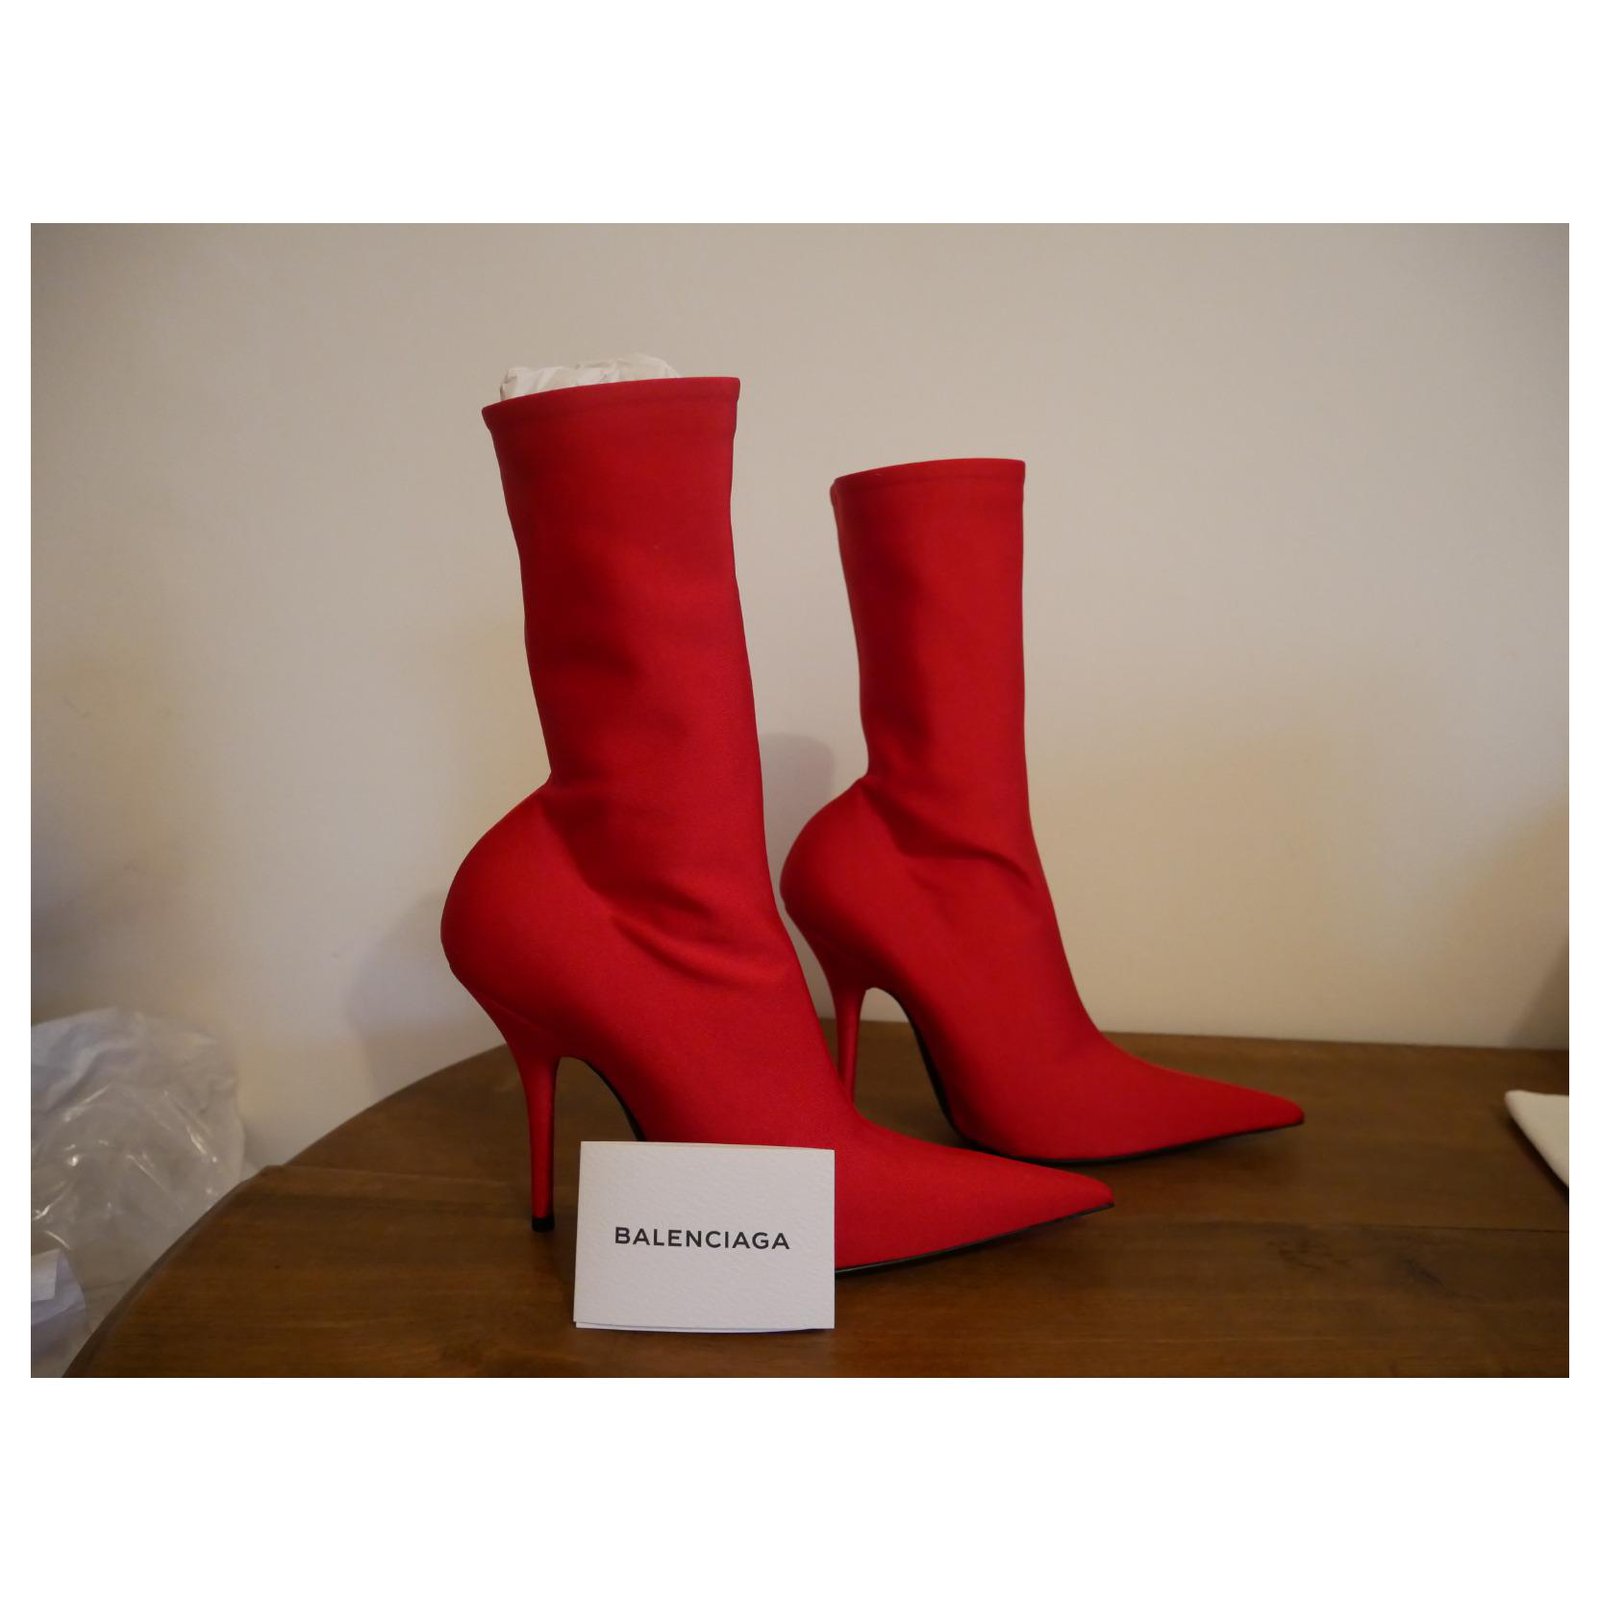 Balenciaga - Authenticated Knife Boots - Cloth Red Plain for Women, Never Worn, with Tag